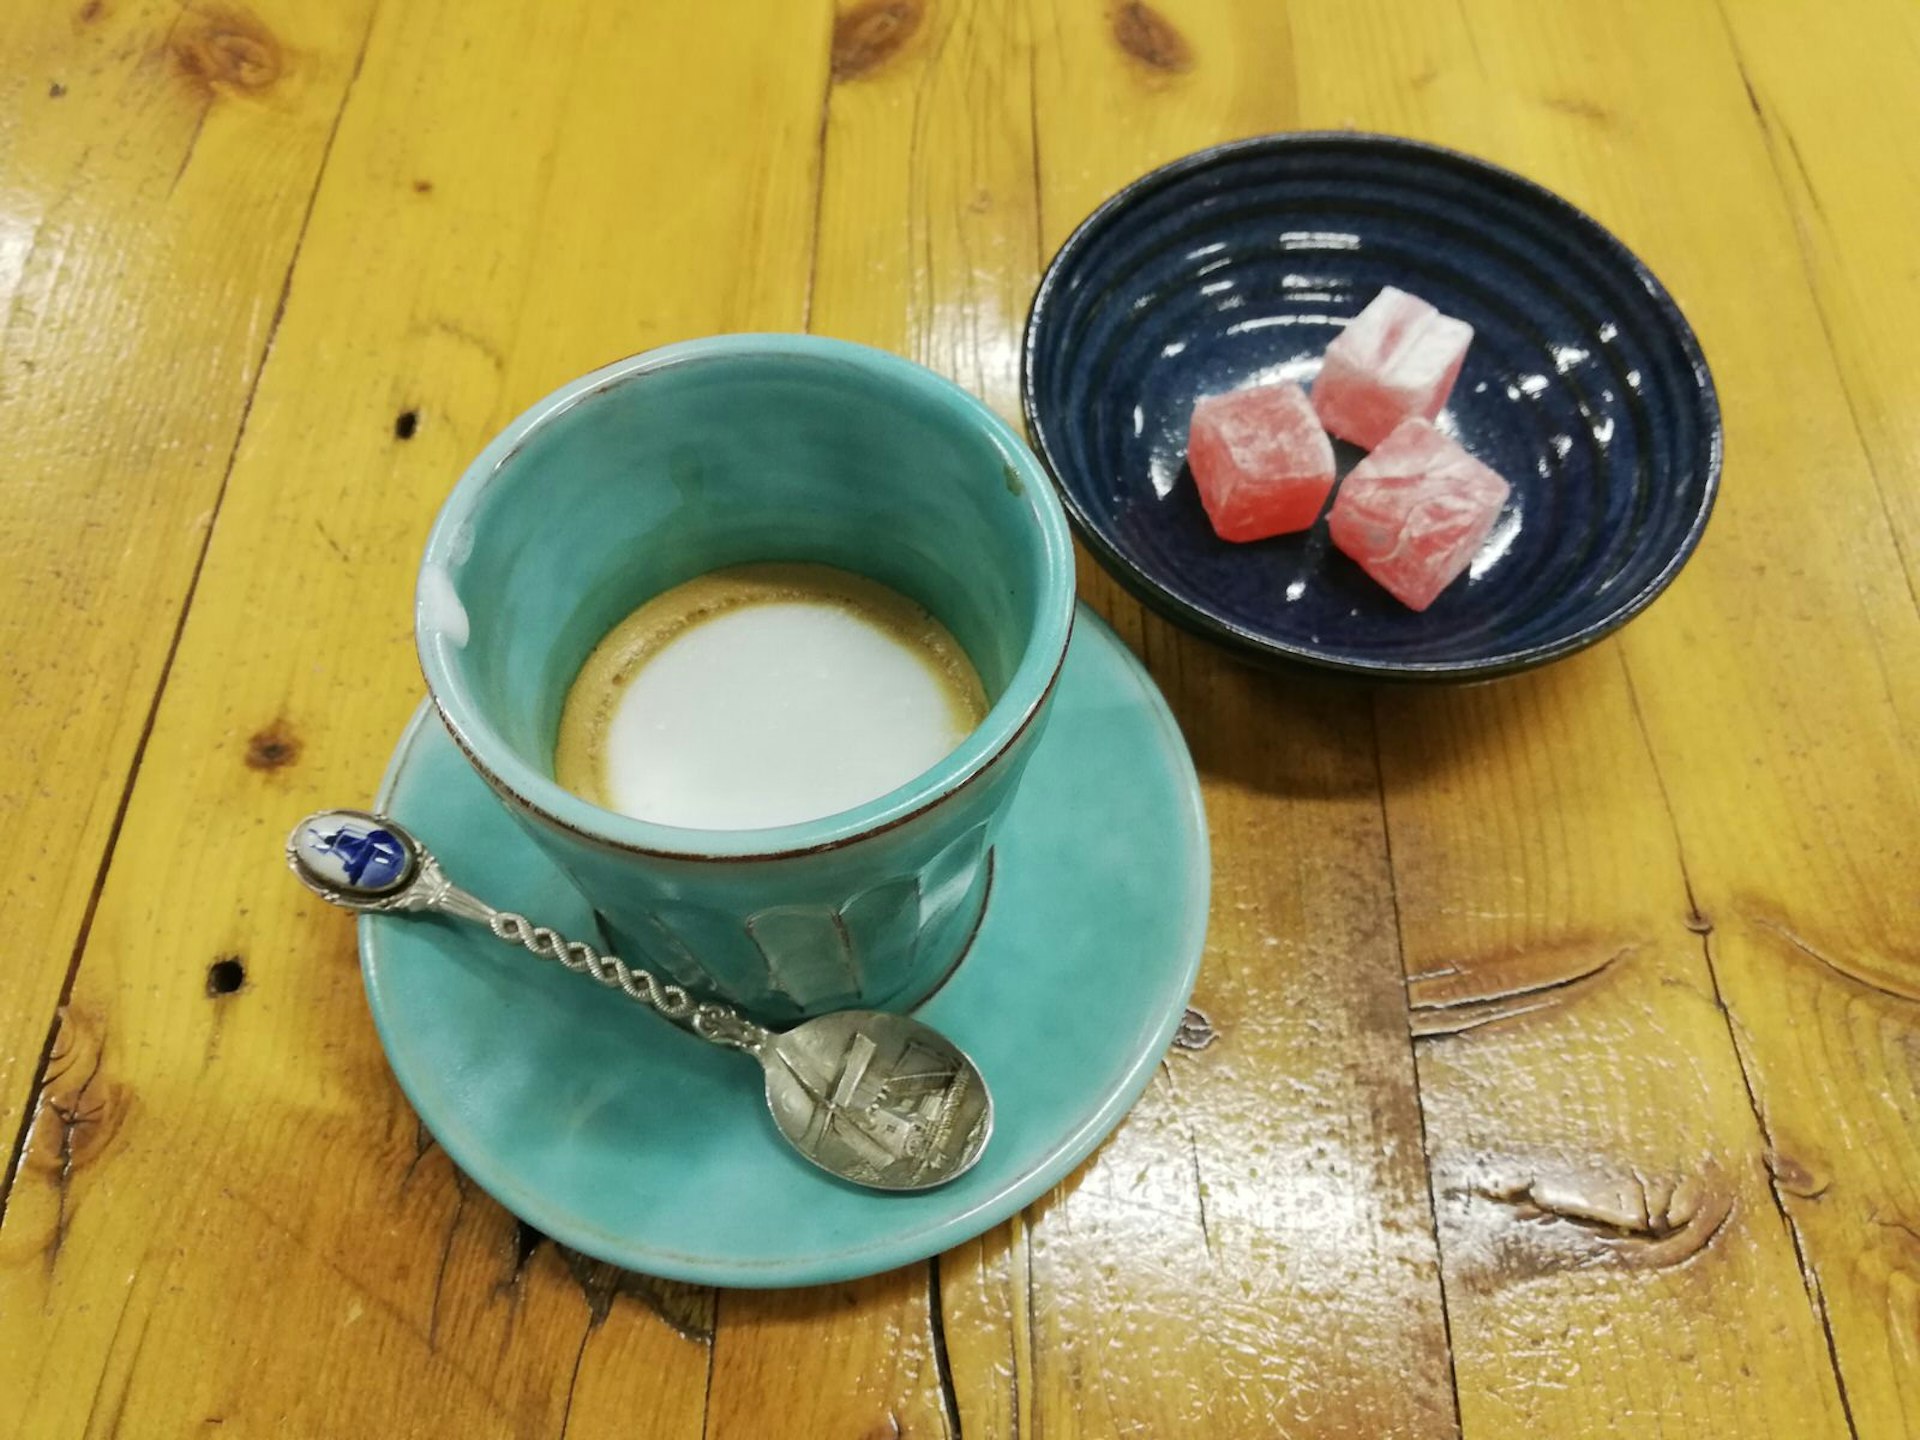 A short coffee with a small topping of milk sits in a jade-coloured cup on a matcher saucer with spoon; next on the wooden table is a deep blue bowl with some pink Turkish delight; an example of cultural variety in the Cape Town coffee scene